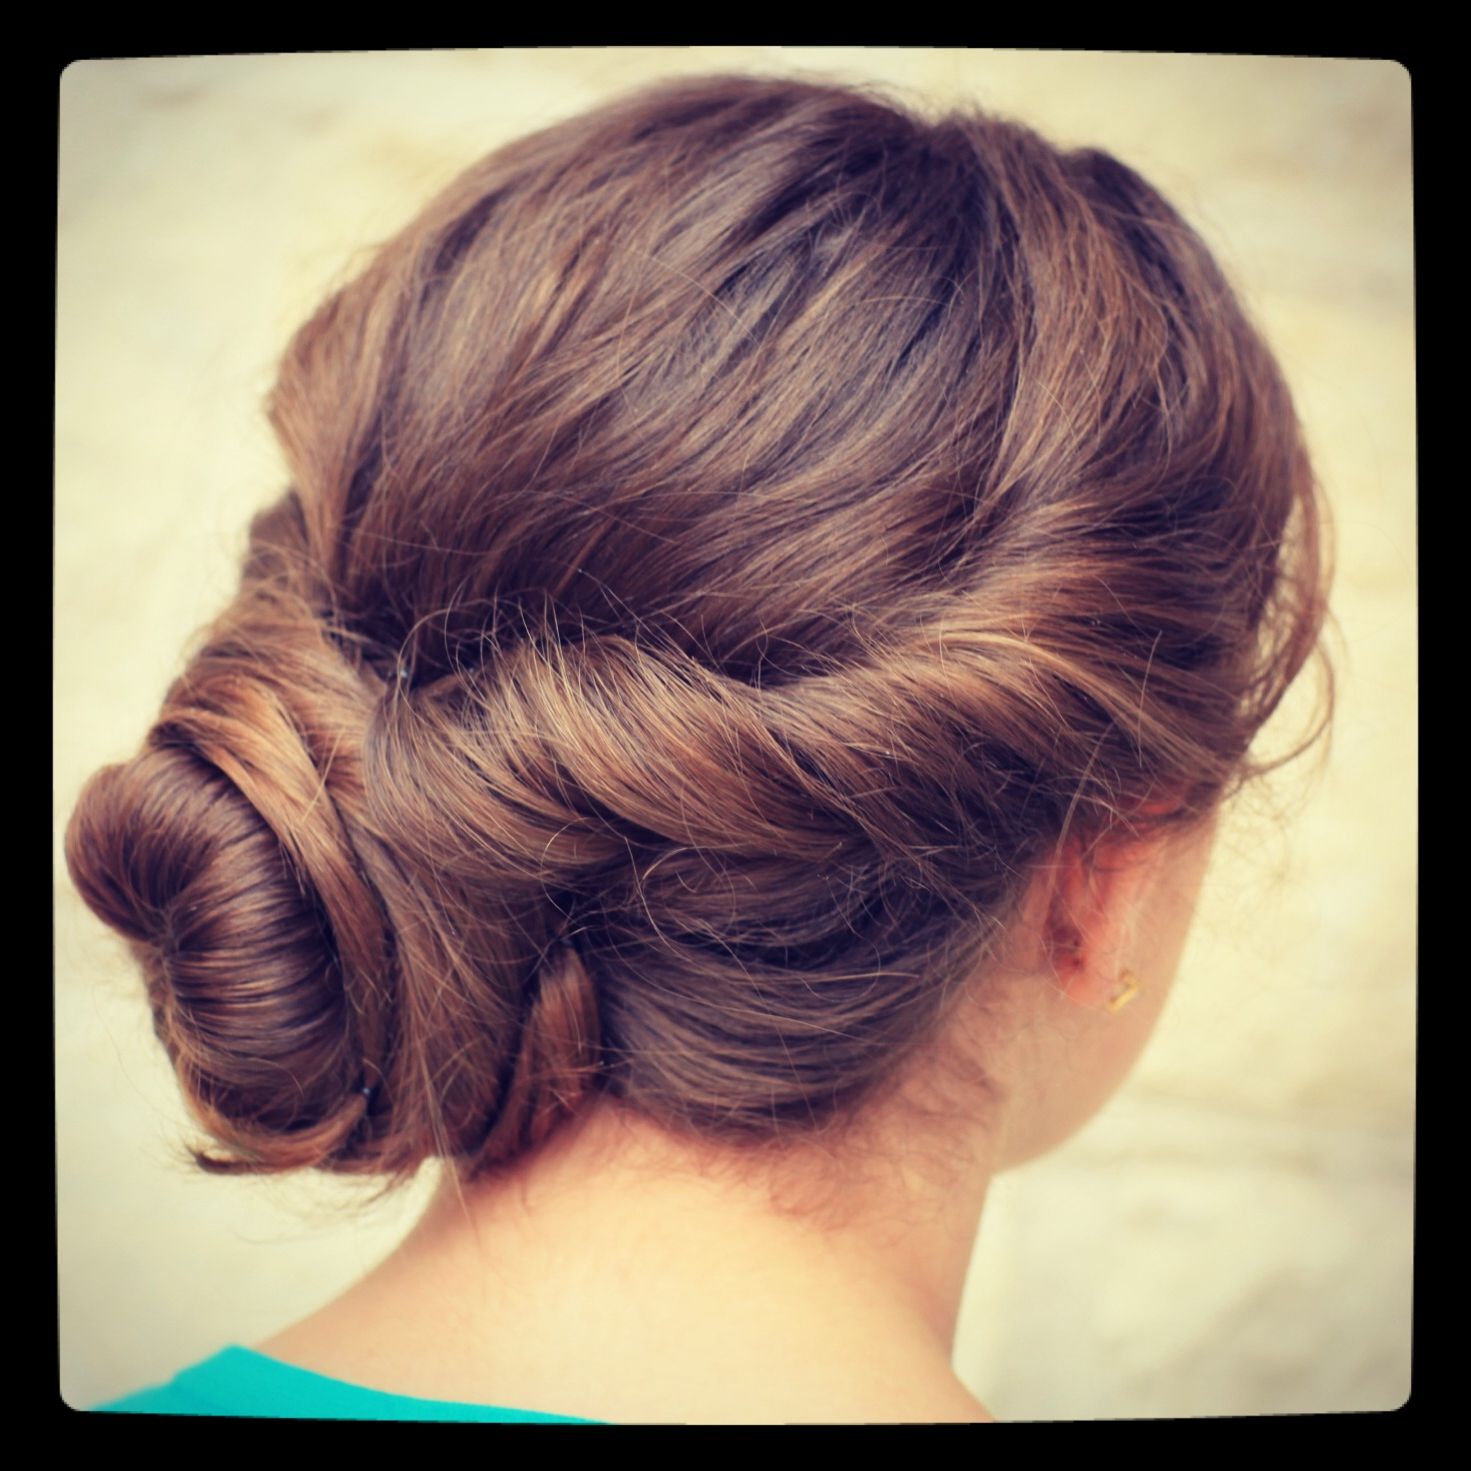 Cute Girls Hairstyles Regarding Favorite Simple Pony Updo Hairstyles With A Twist (View 11 of 20)